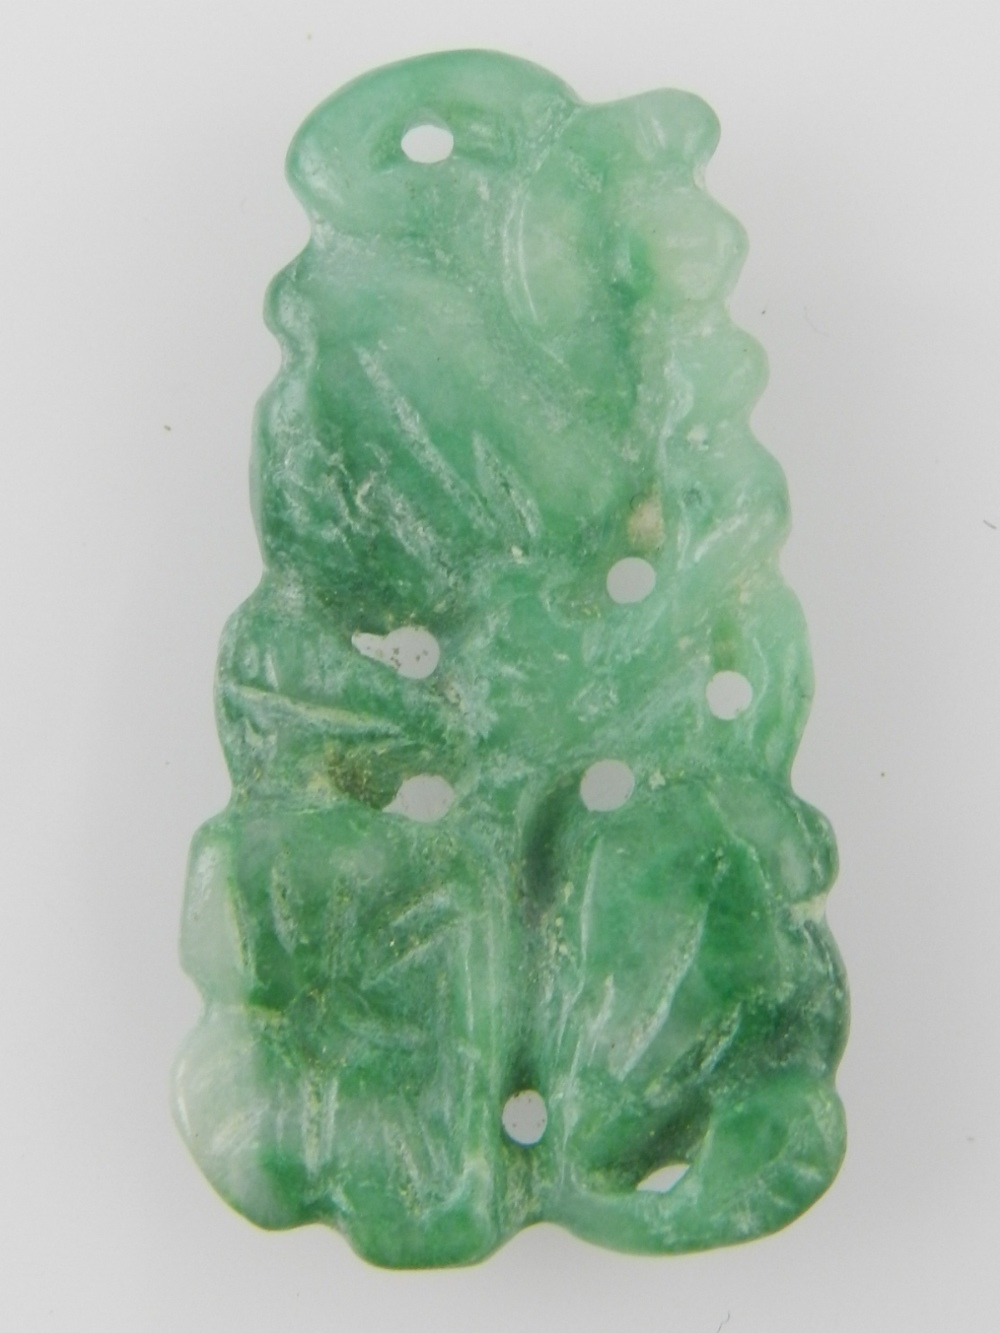 A green jade pendant of reticulated floral design.